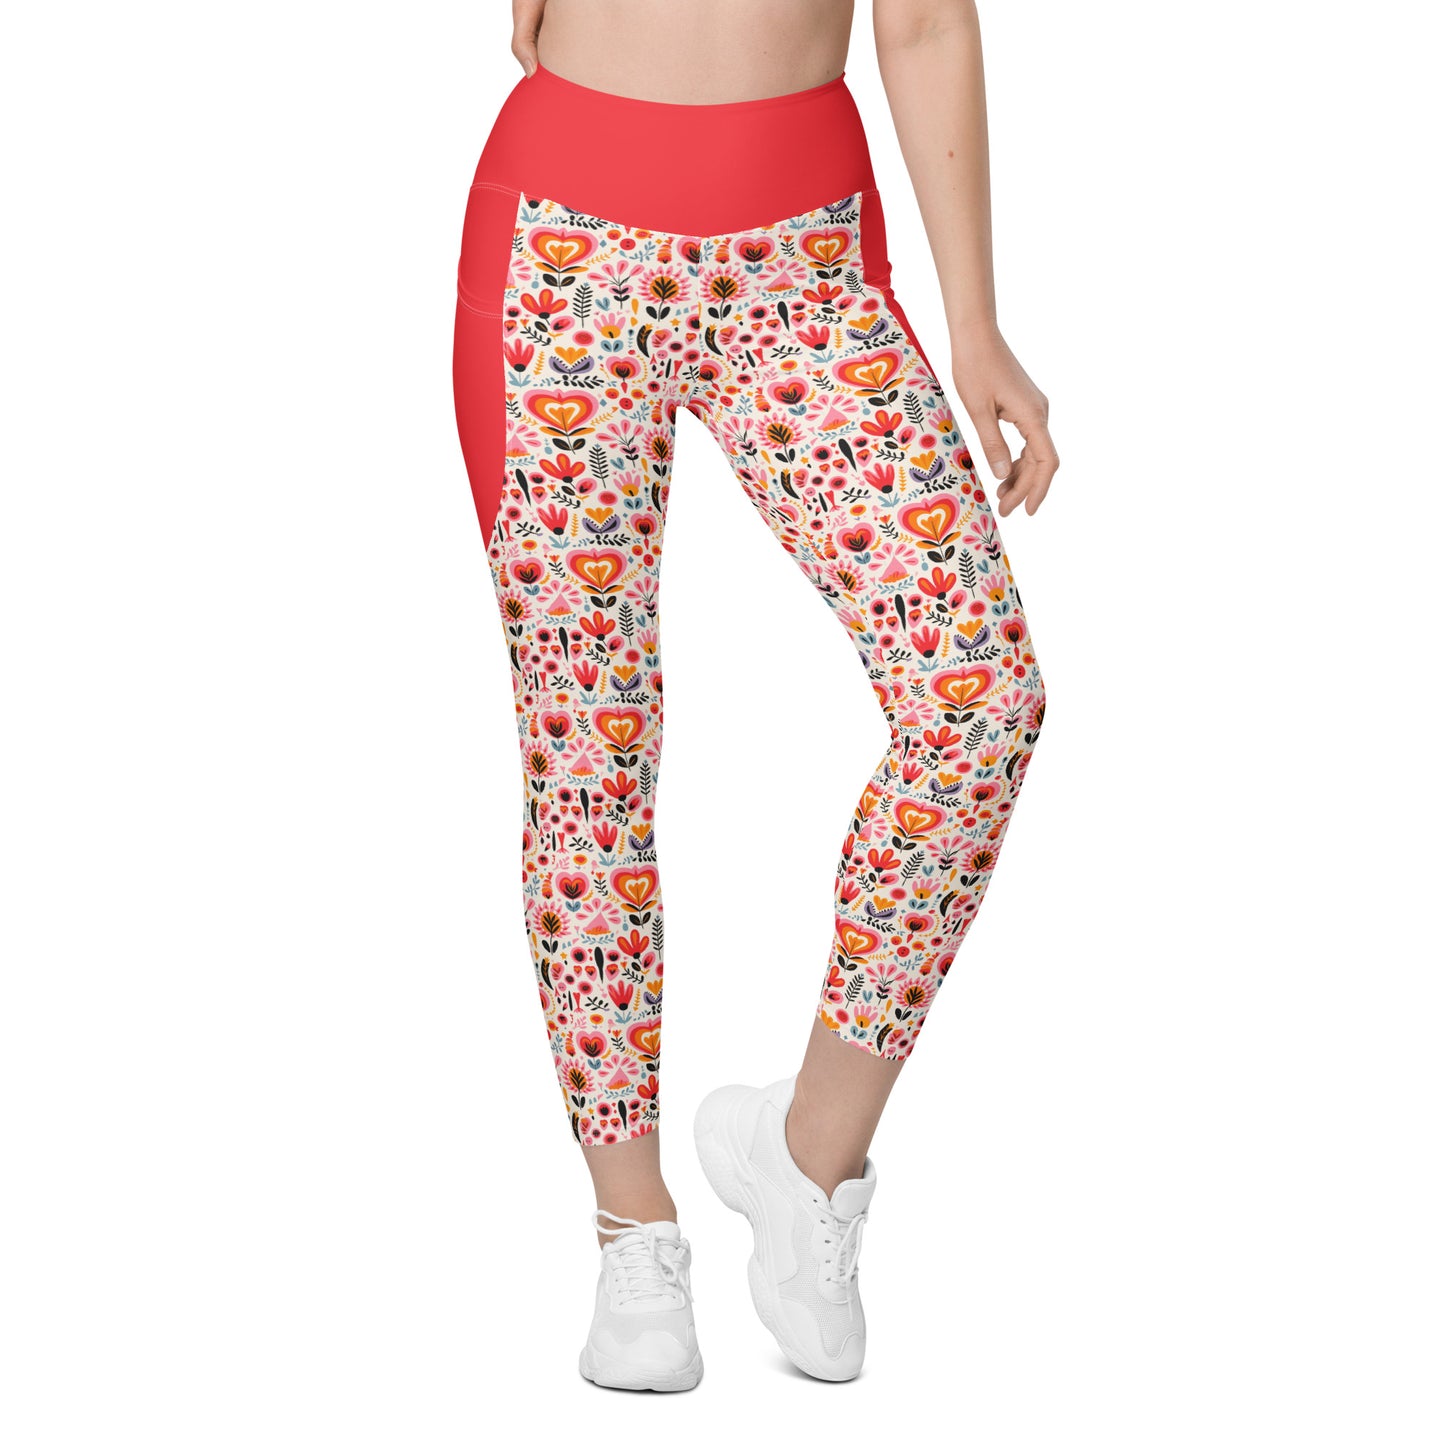 Nord High Waist 7/8 Recycled Yoga Leggings / Yoga Pants with Pockets